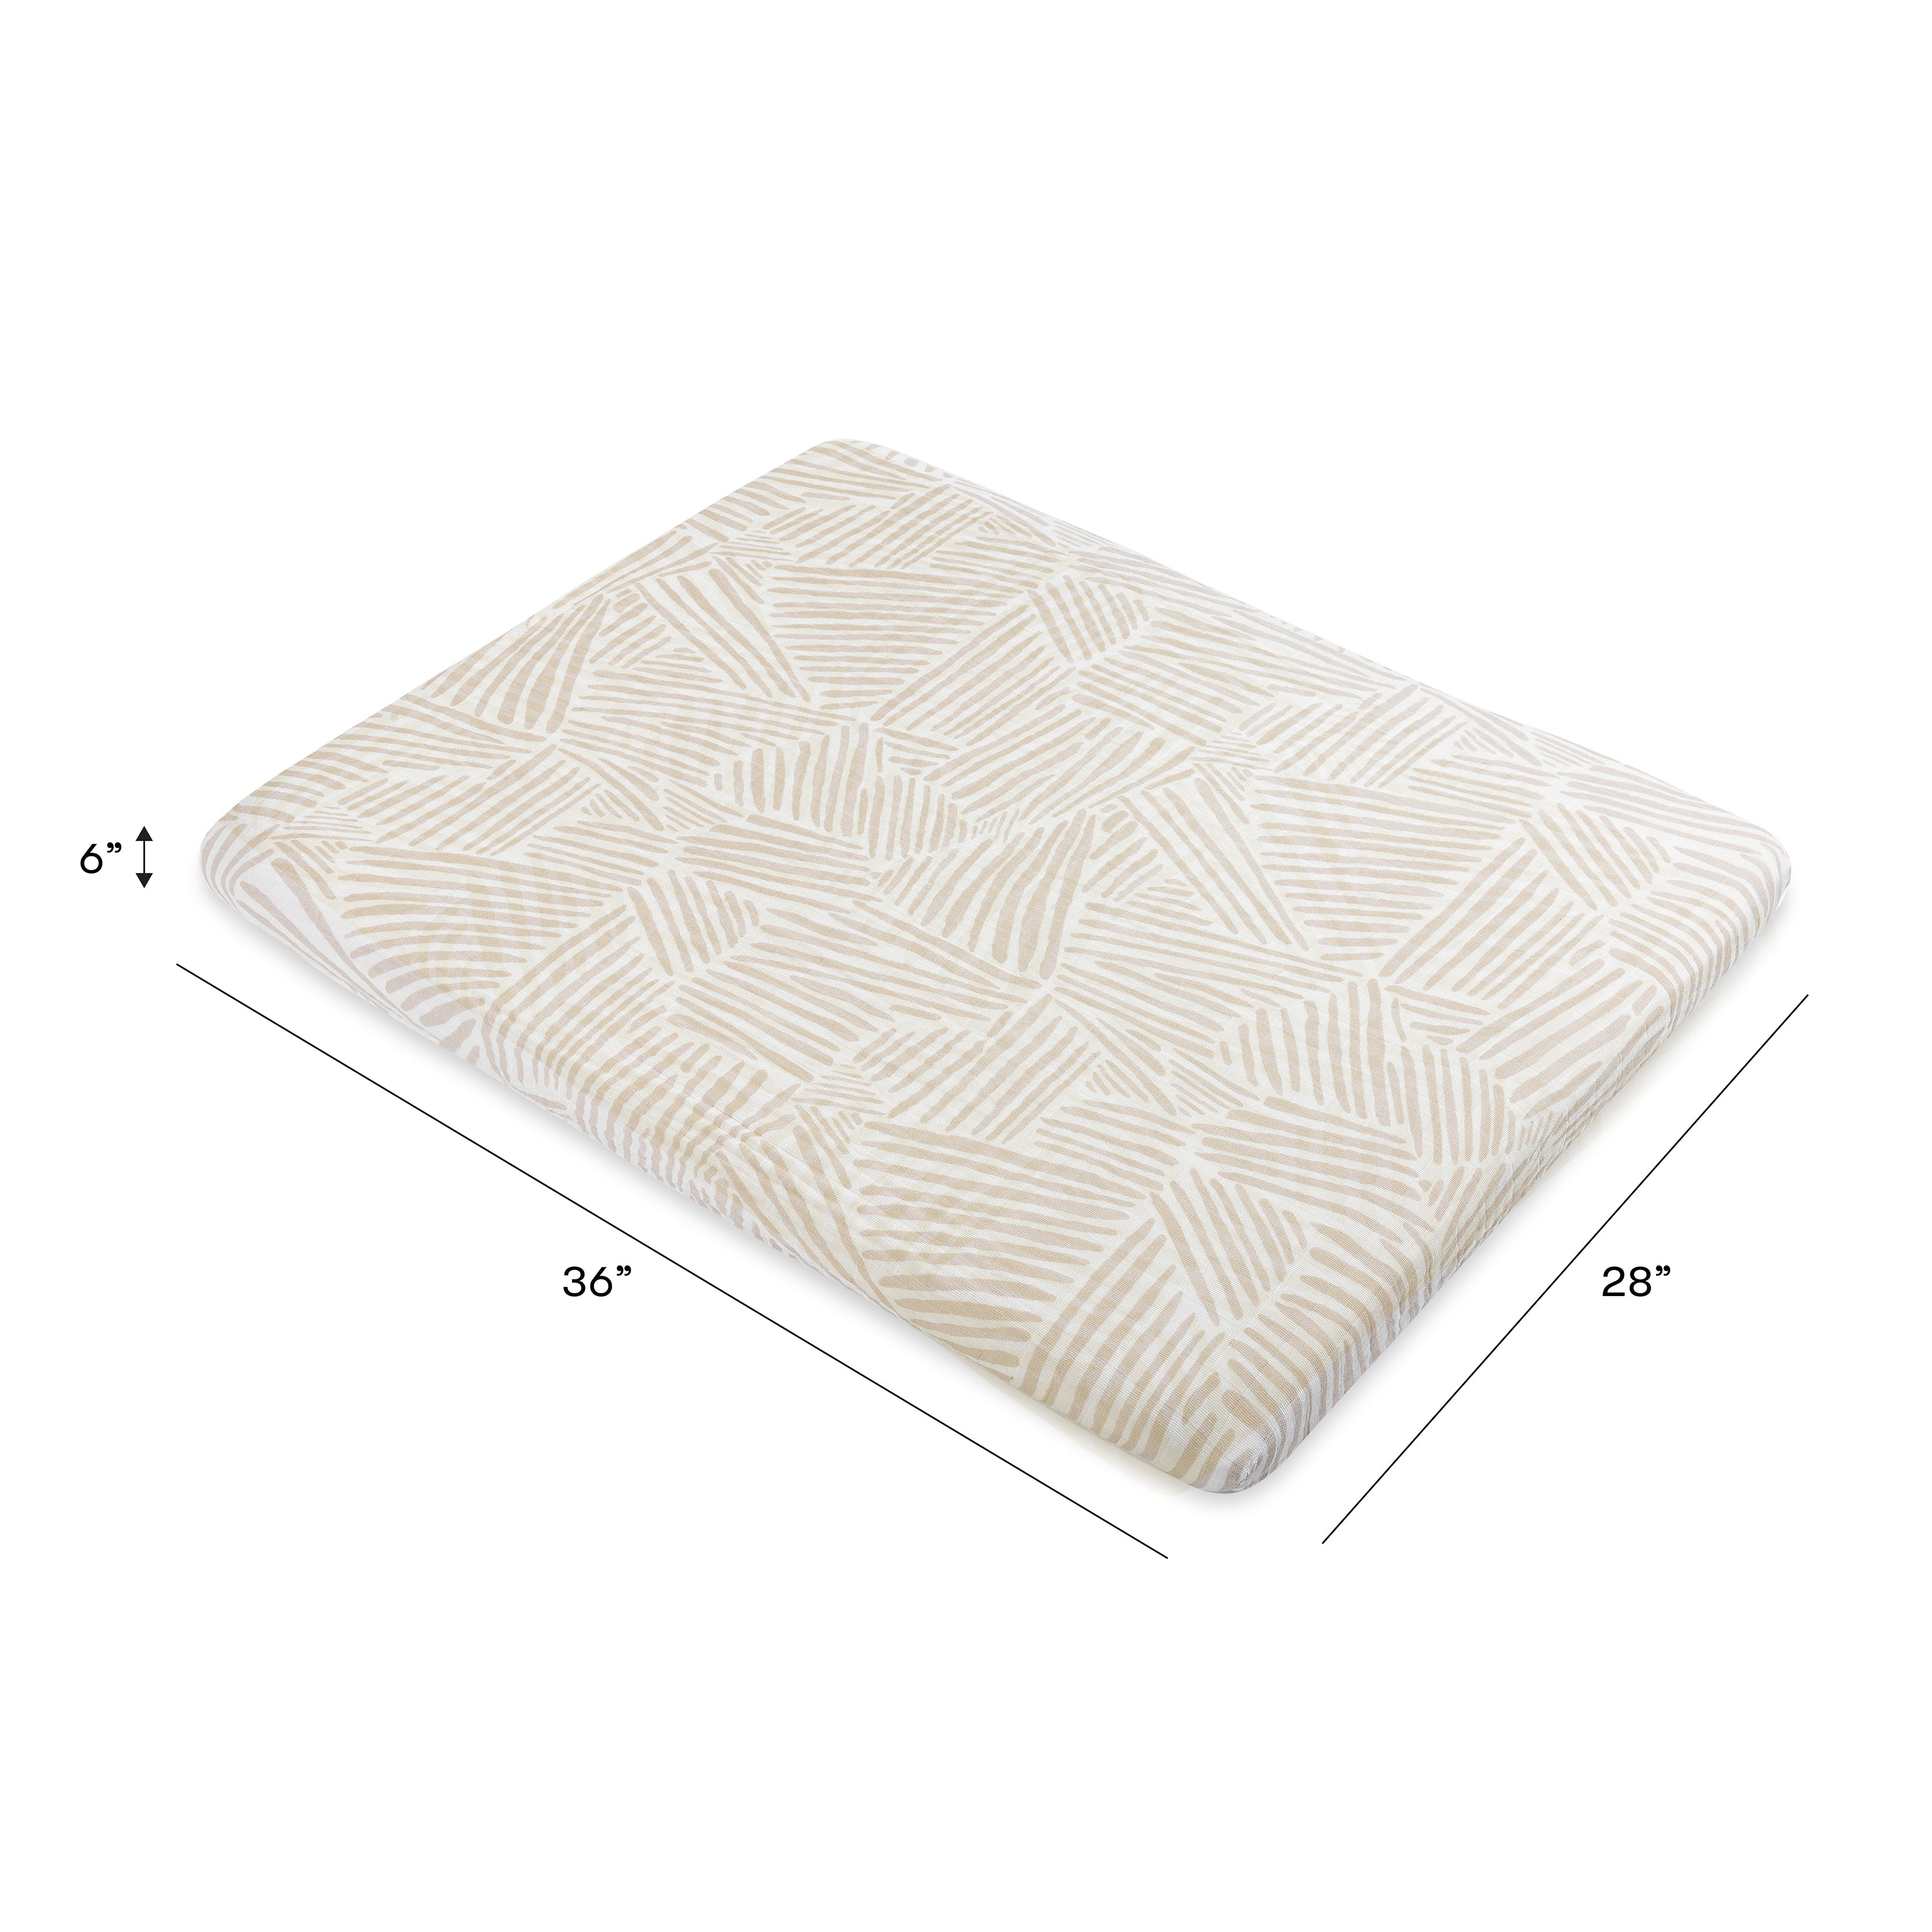 Babyletto All-Stages Midi Crib Sheet in GOTS Certified Organic Muslin Cotton